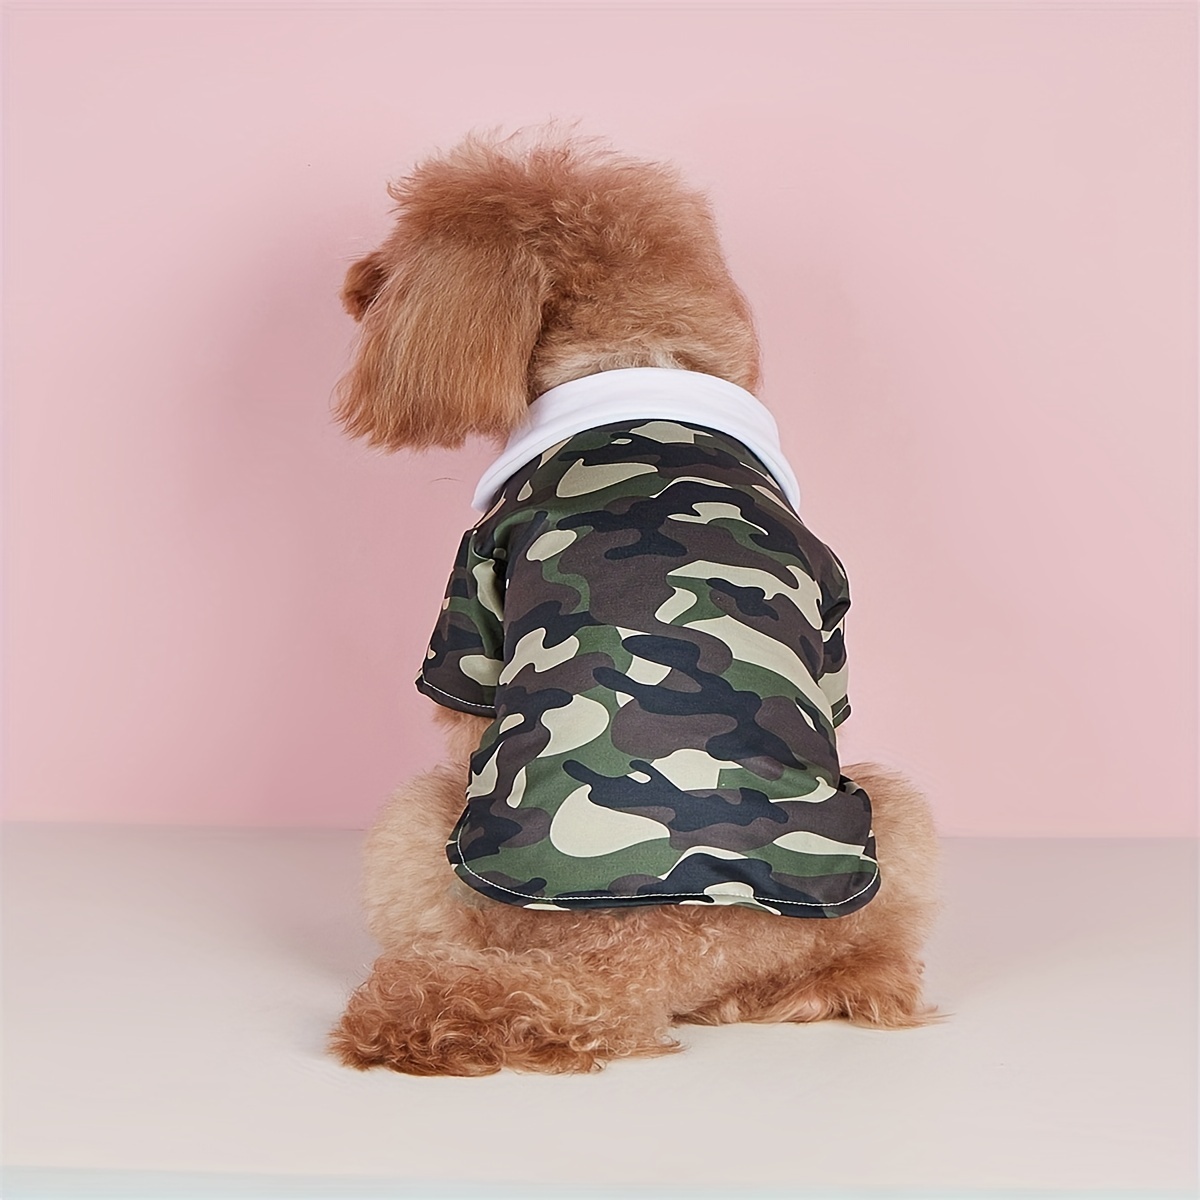  Outtop Pet Dogs Football Shirt Sports Clothes Spring Summer  (A, X-Small) : Pet Supplies